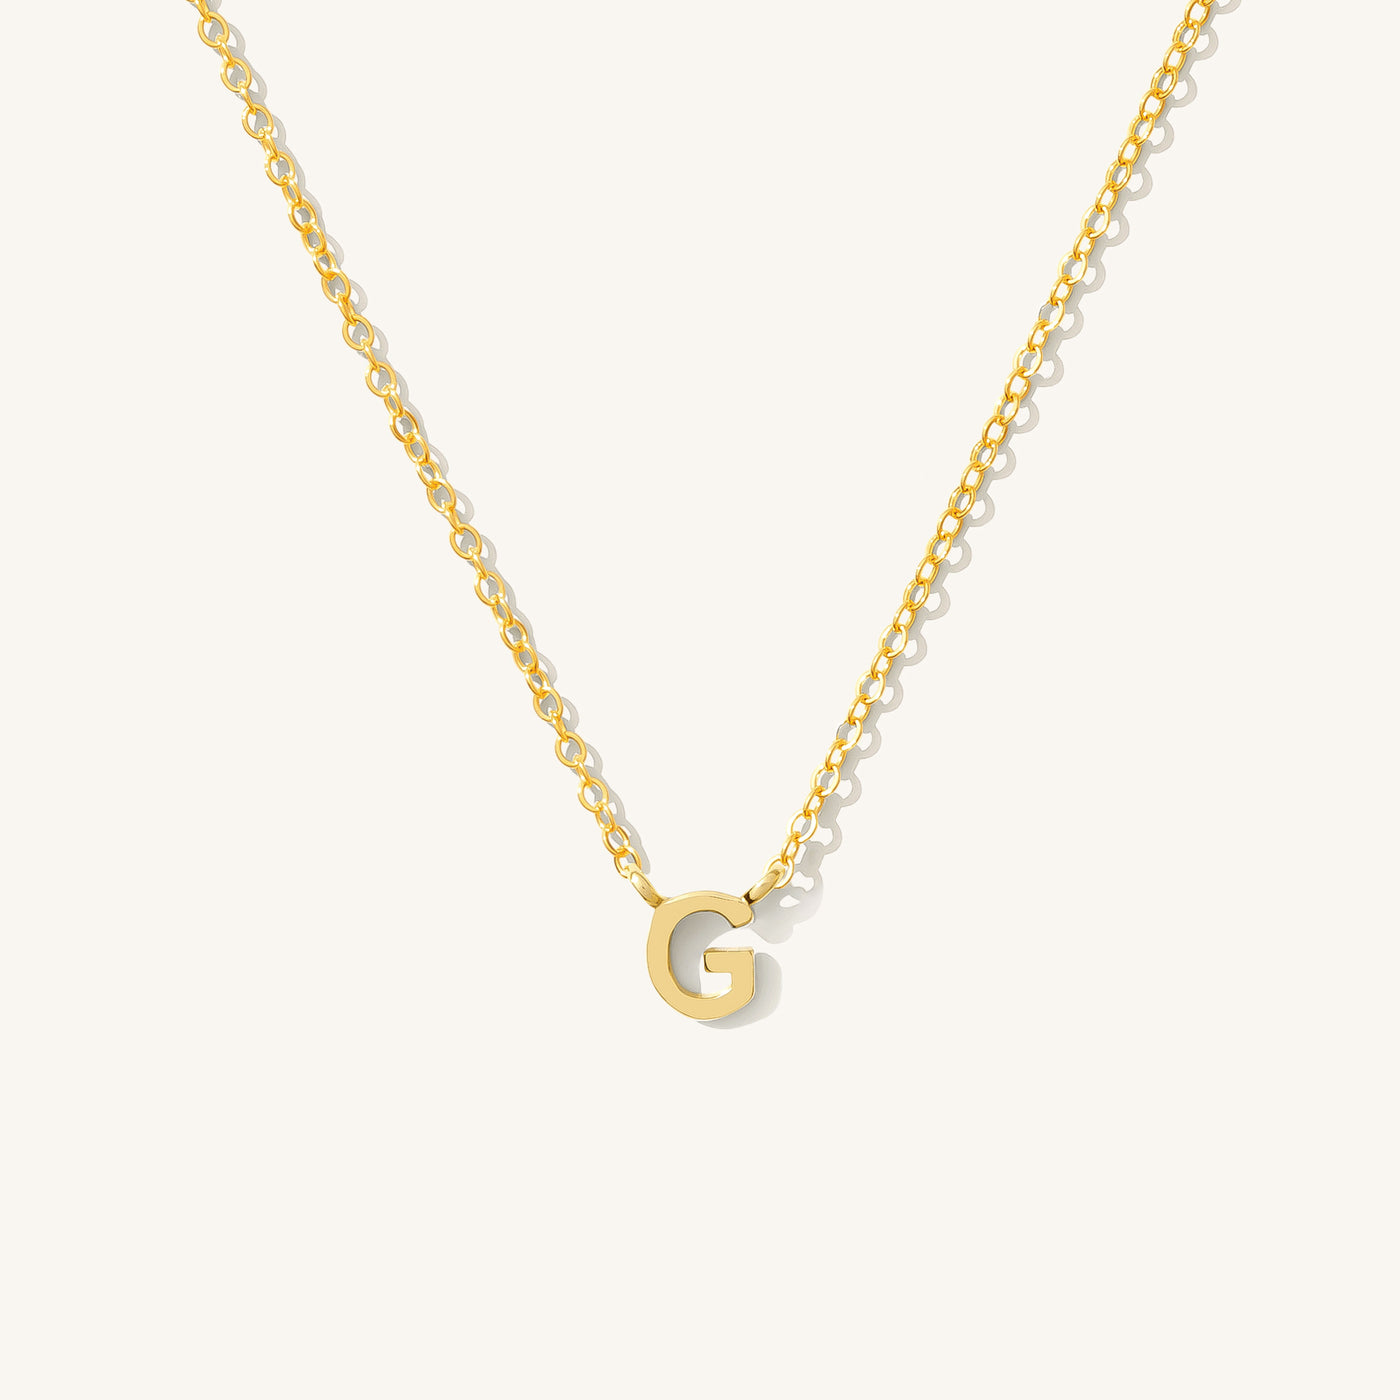 Silver G Letter Necklace | Royal Chain Group